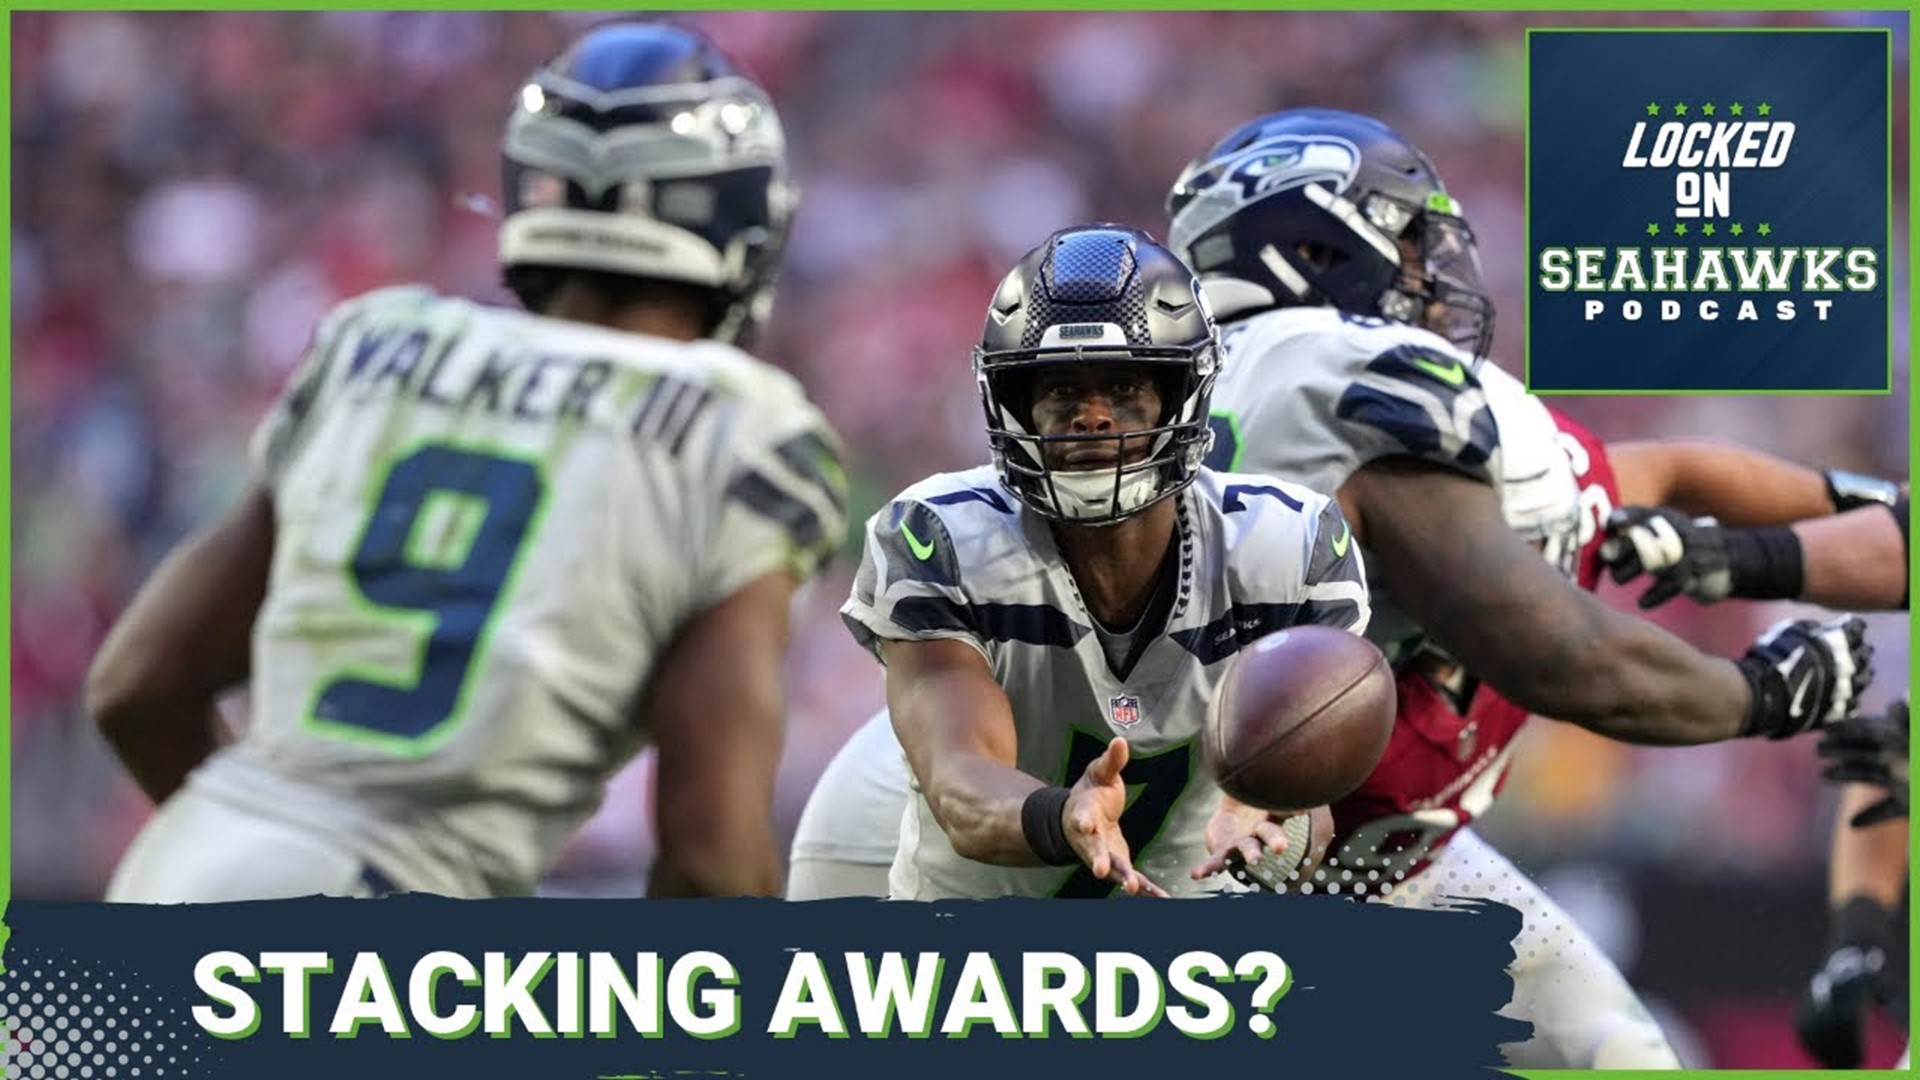 After earning a playoff berth few saw coming back in August, the NFL announced three Seahawks have been nominated as finalists for major awards.